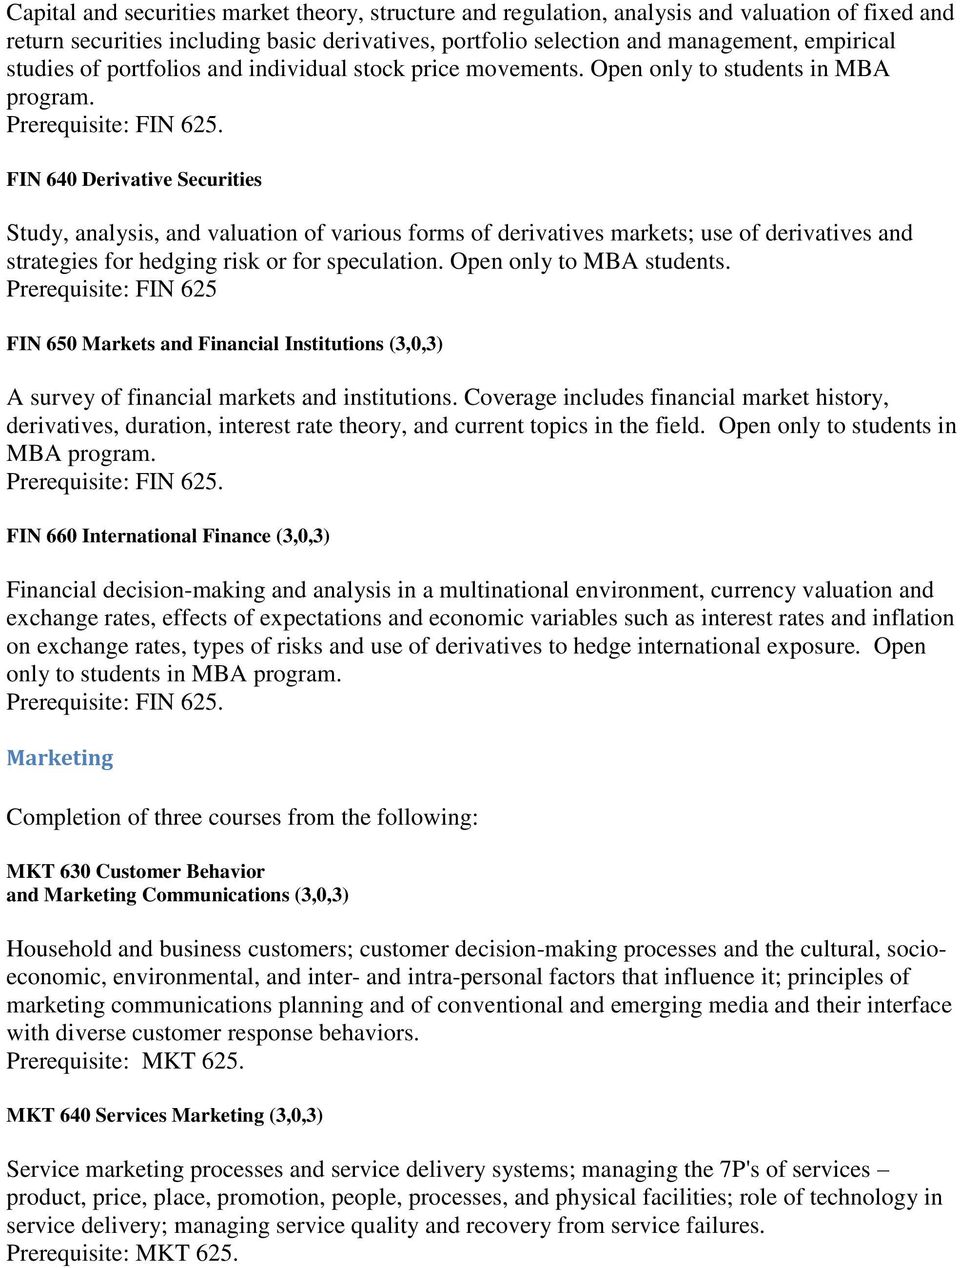 FIN 640 Derivative Securities Study, analysis, and valuation of various forms of derivatives markets; use of derivatives and strategies for hedging risk or for speculation. Open only to MBA students.